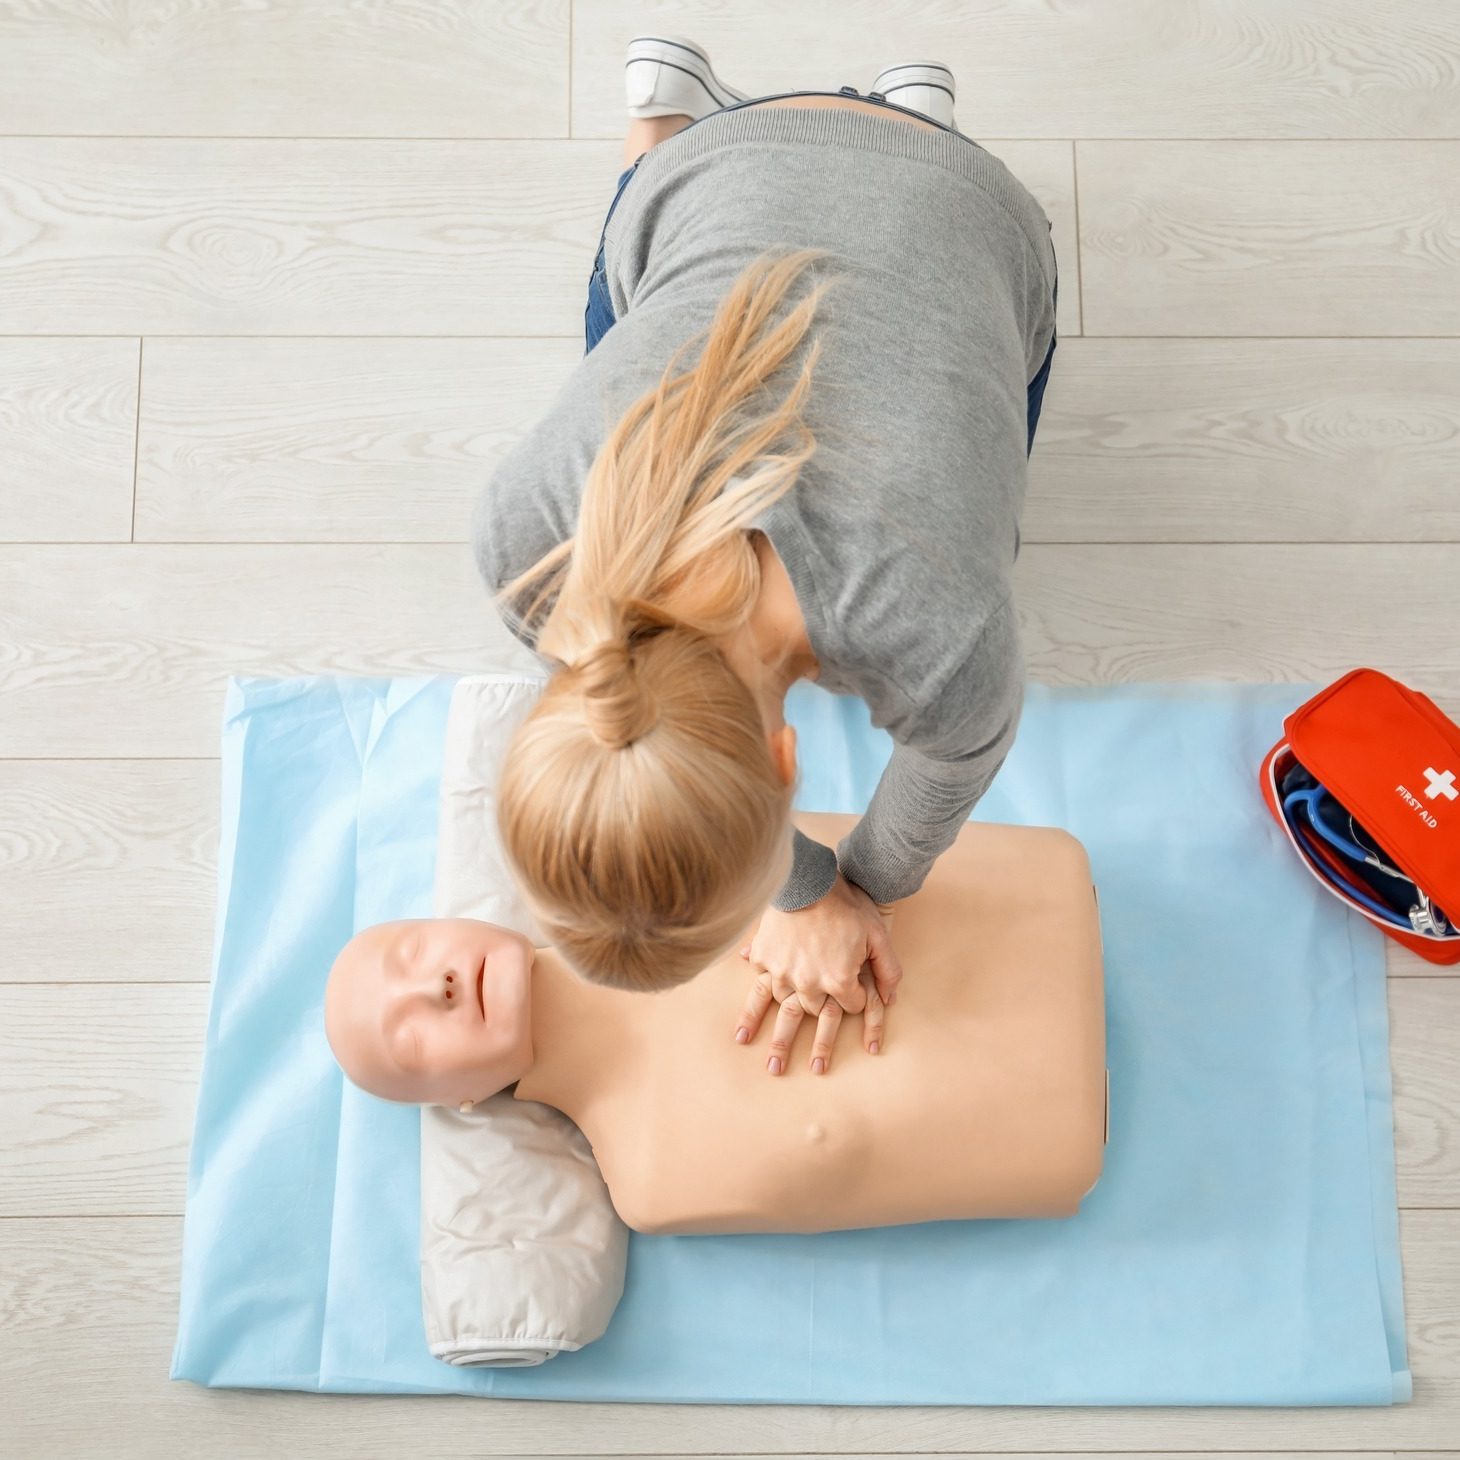 Woman practicing CPR on mannequin at first aid class